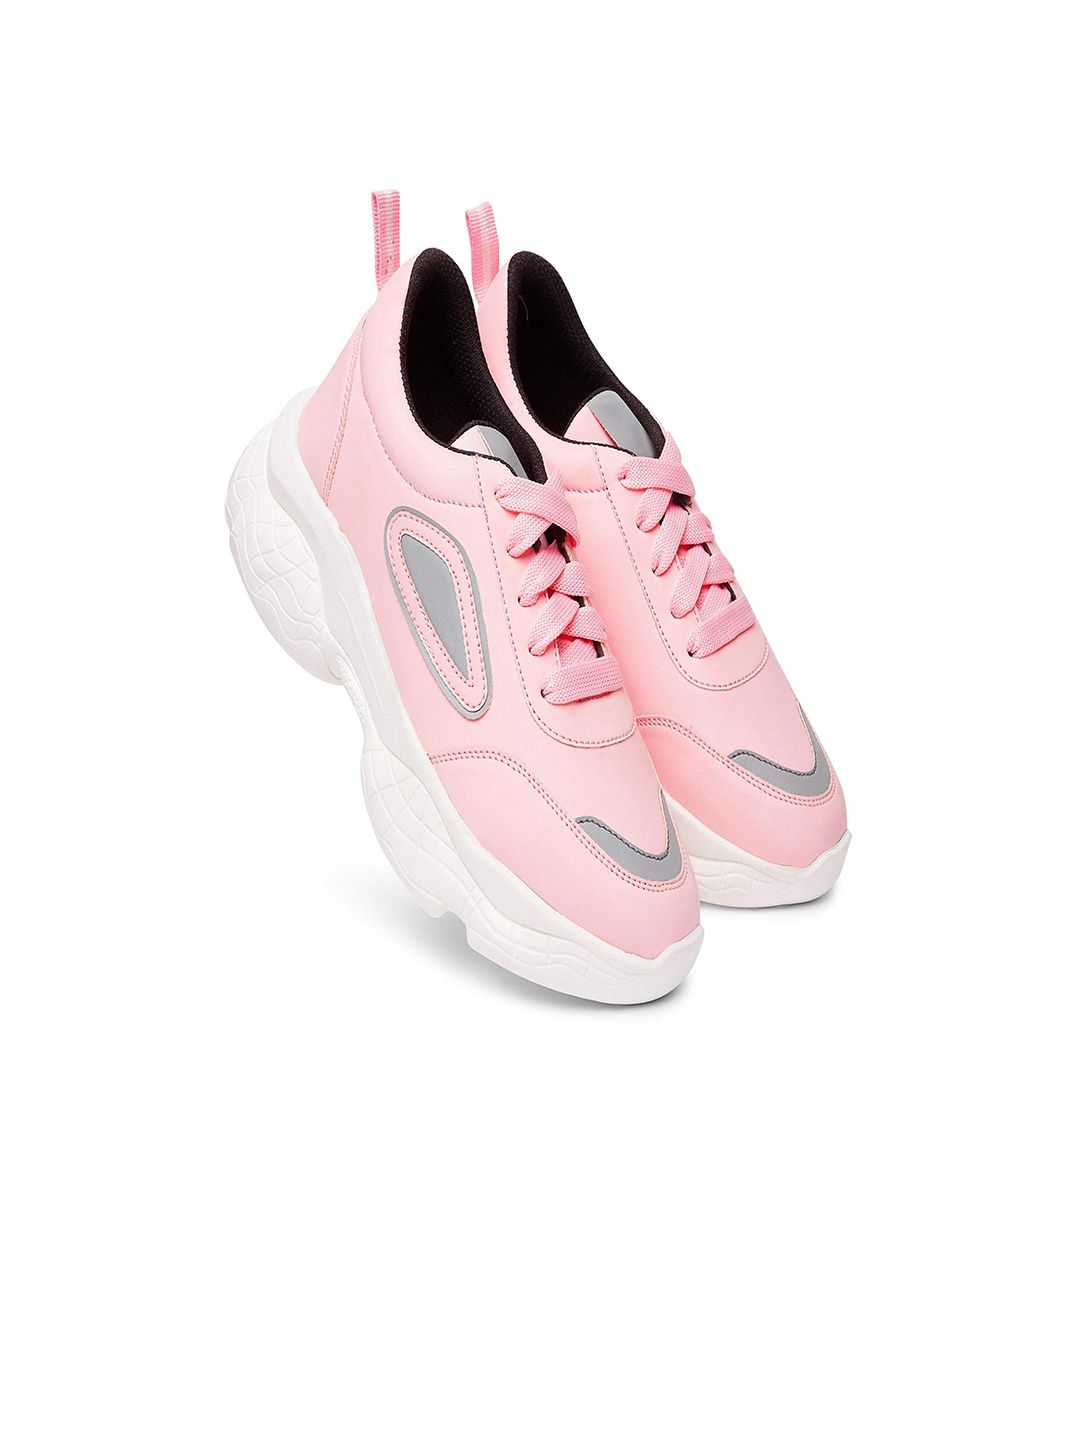 BEONZA Women Pink Colourblocked Sneakers Price in India